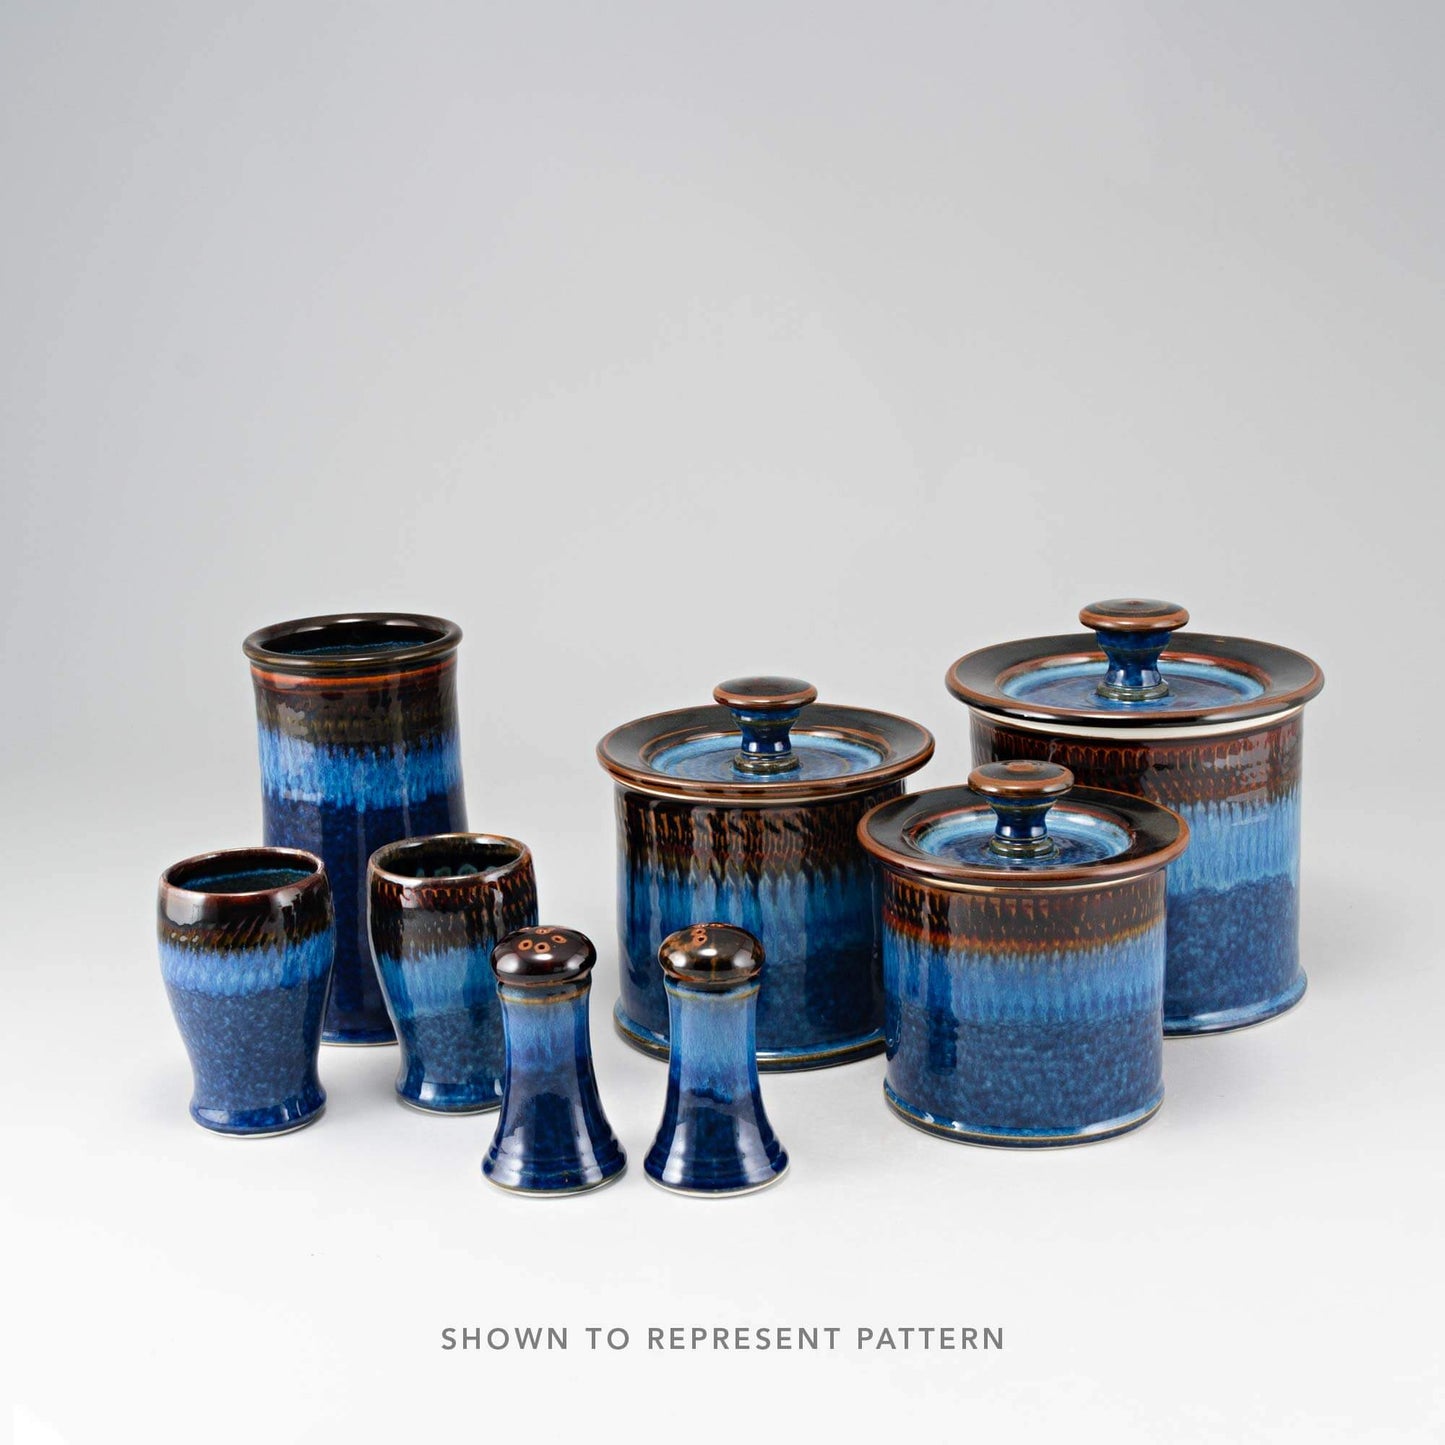 Handmade Pottery Diffuser in Blue Hamada pattern made by Georgetown Pottery in Maine